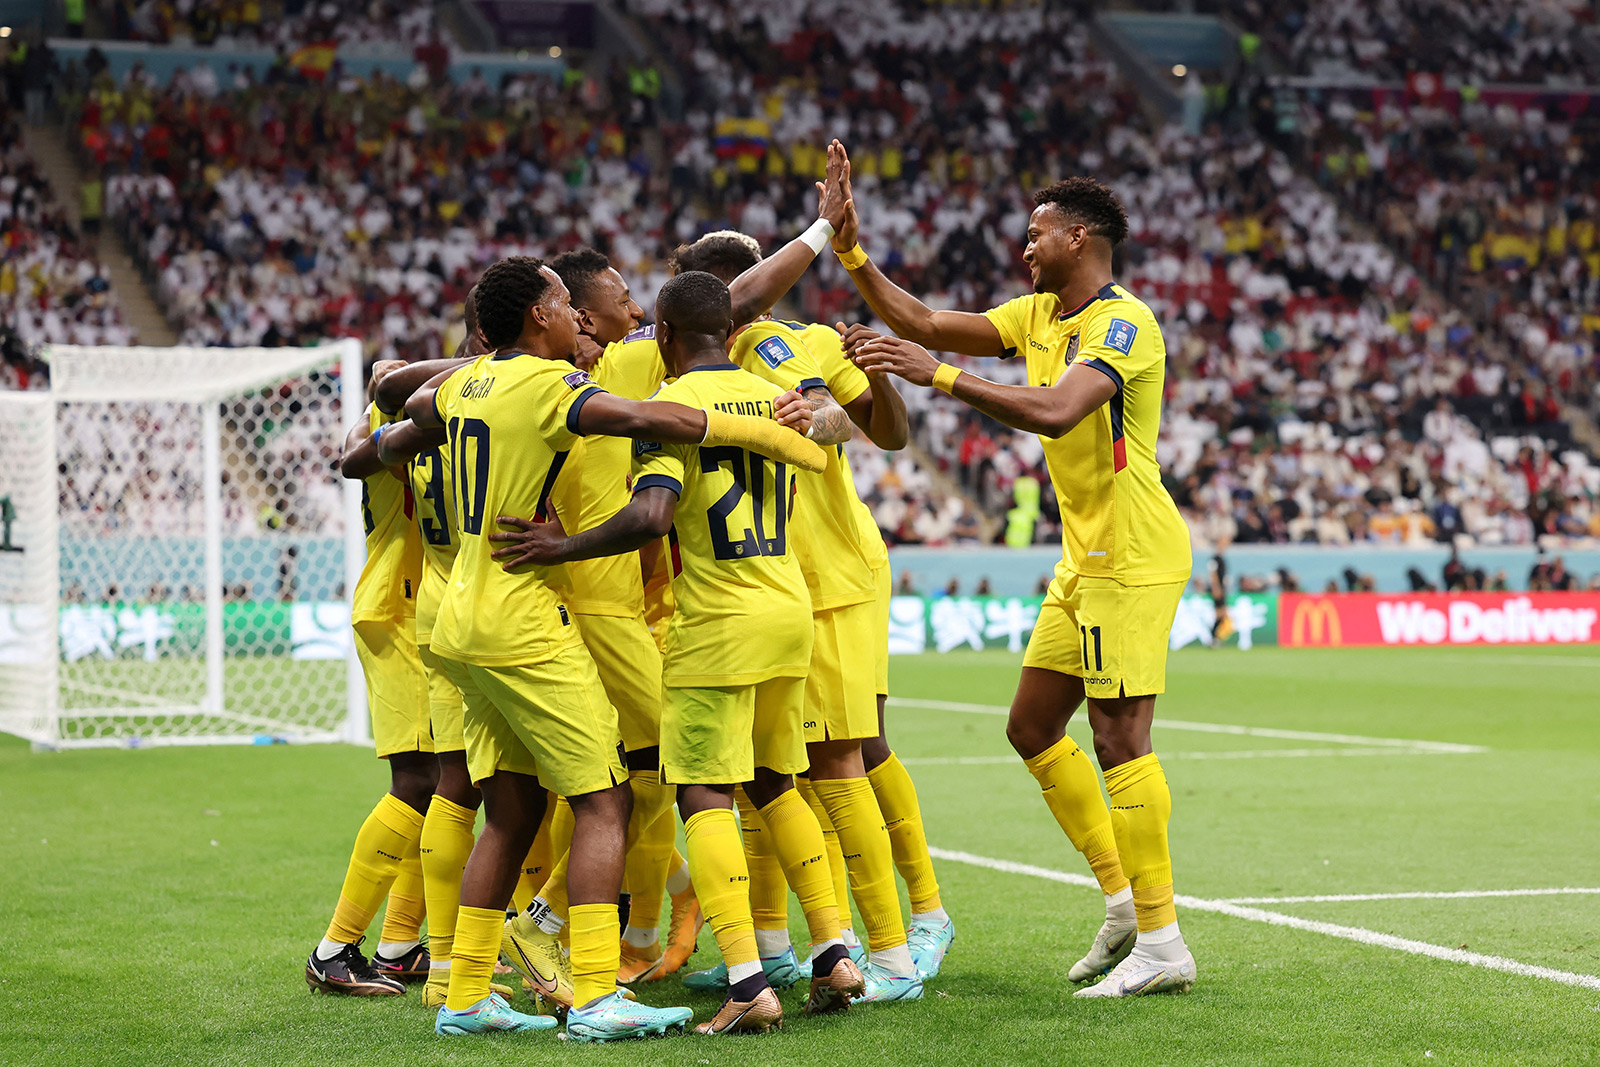 Ecuador celebrates after Enner Valencia scored on a penalty kick in the first half.